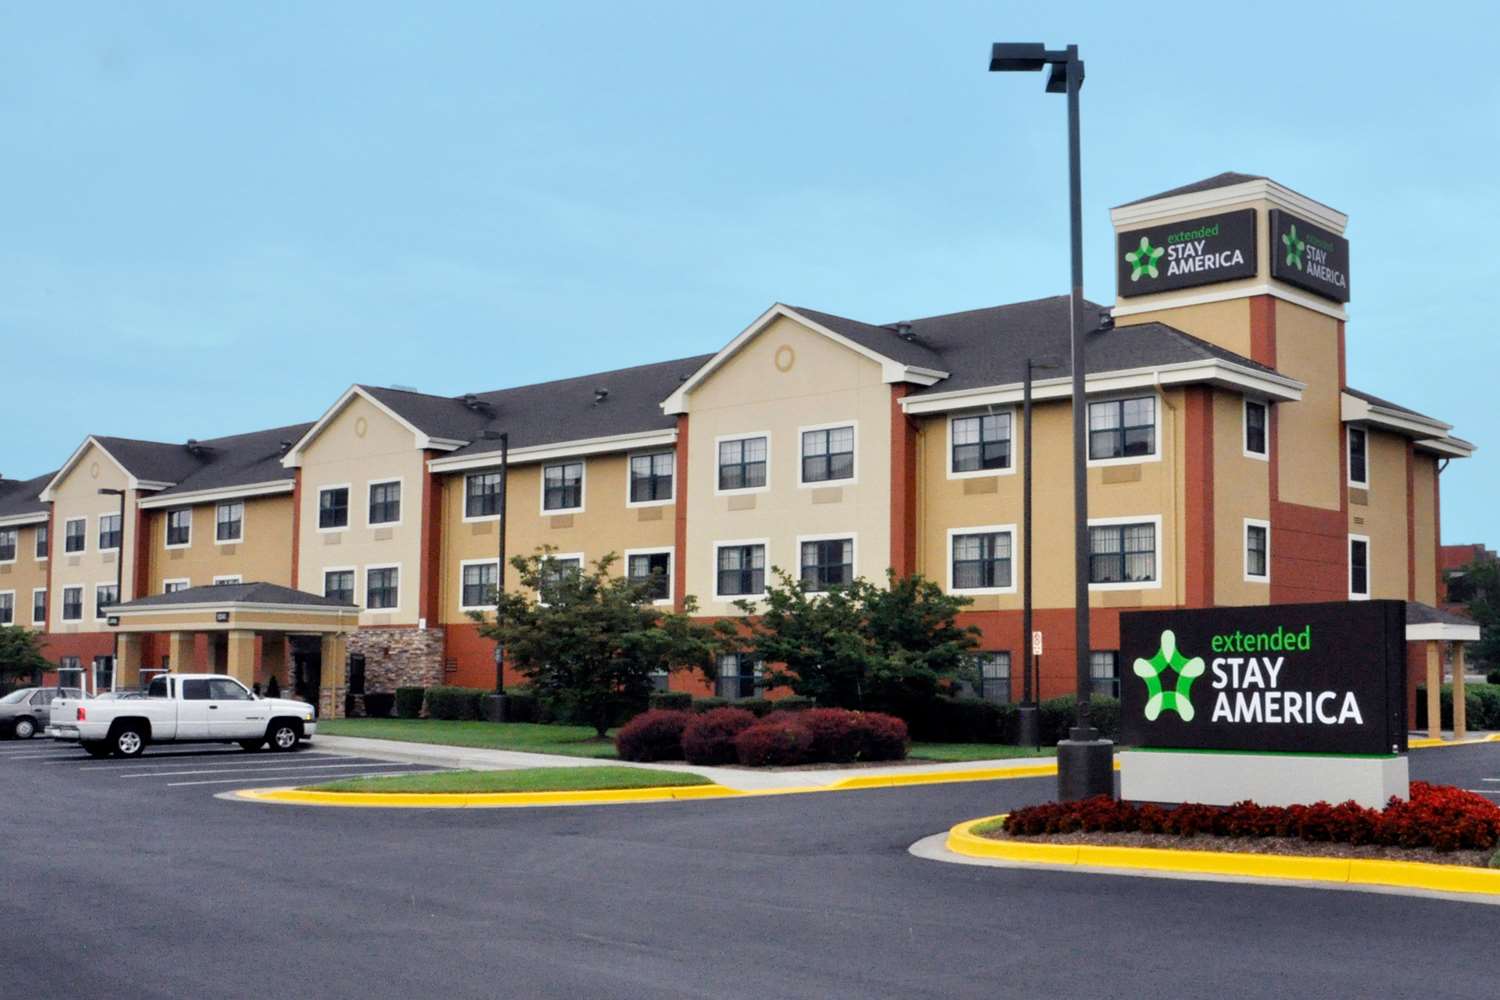 Pet Friendly Extended Stay America Frederick - Westview Dr. in Frederick, Maryland